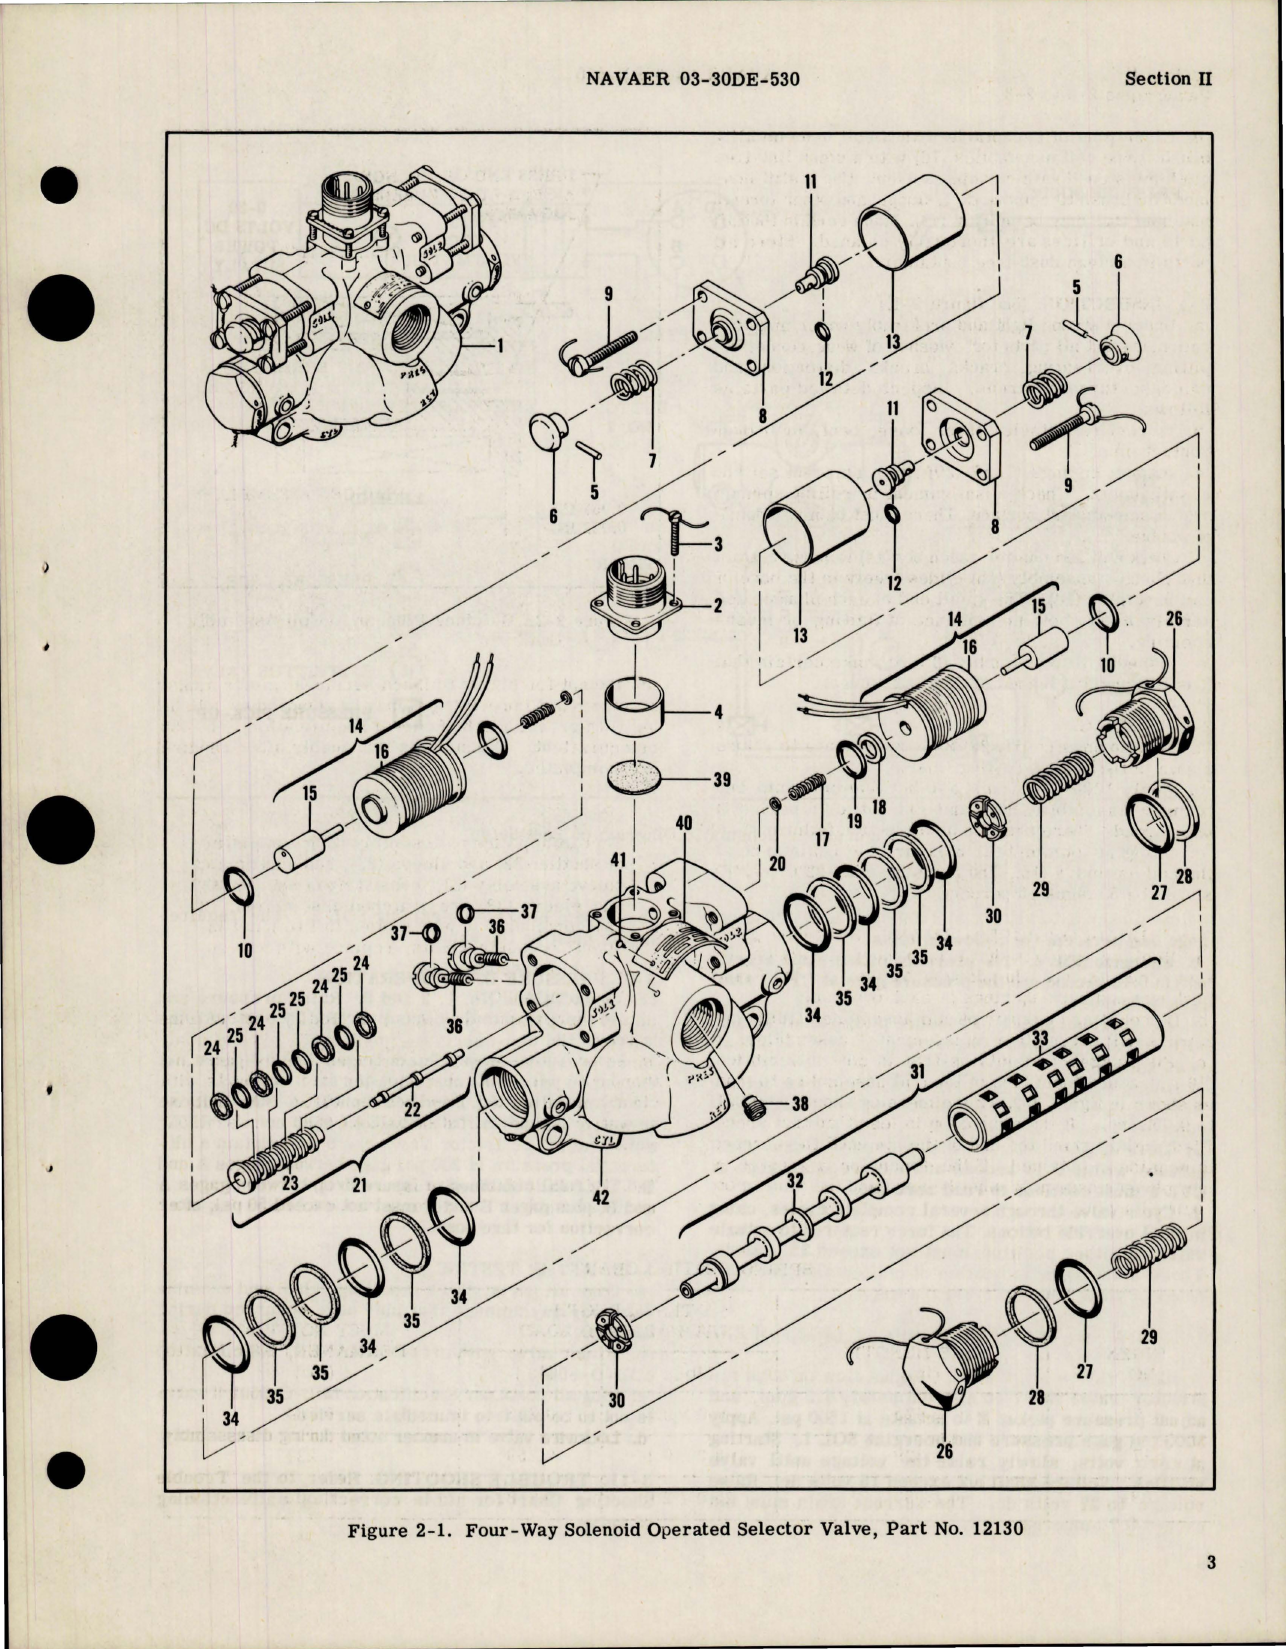 Sample page 7 from AirCorps Library document: Overhaul Instructions for Four-Way Solenoid Operated Selector Valves - Parts 12130, 12130-2, 12390